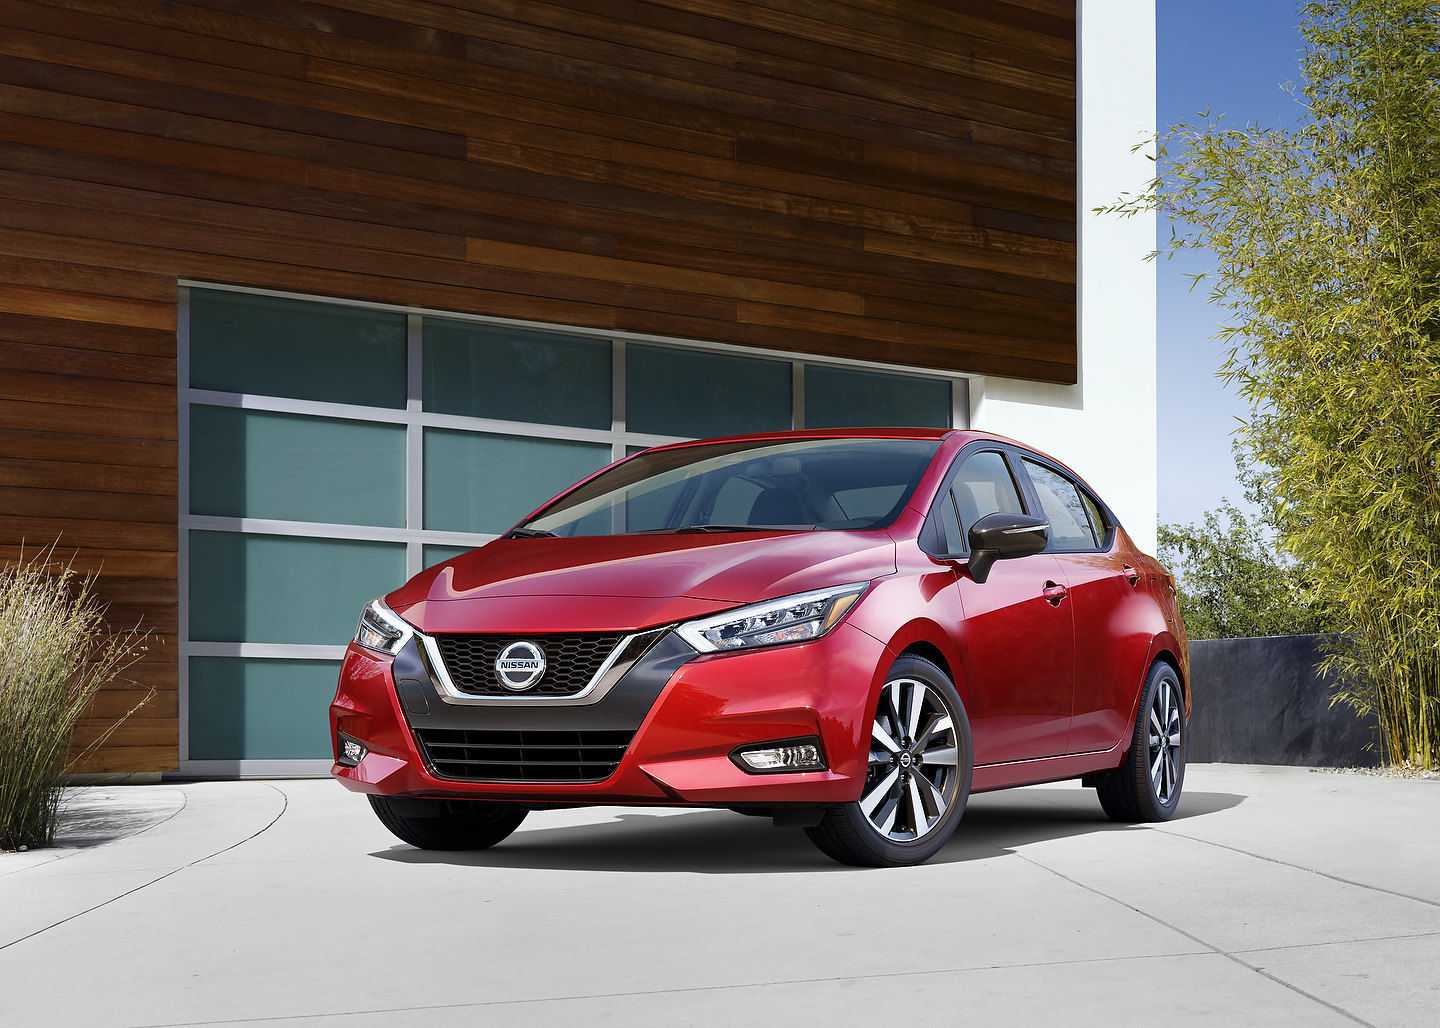 Three things that are easy to love about the 2021 Nissan Versa